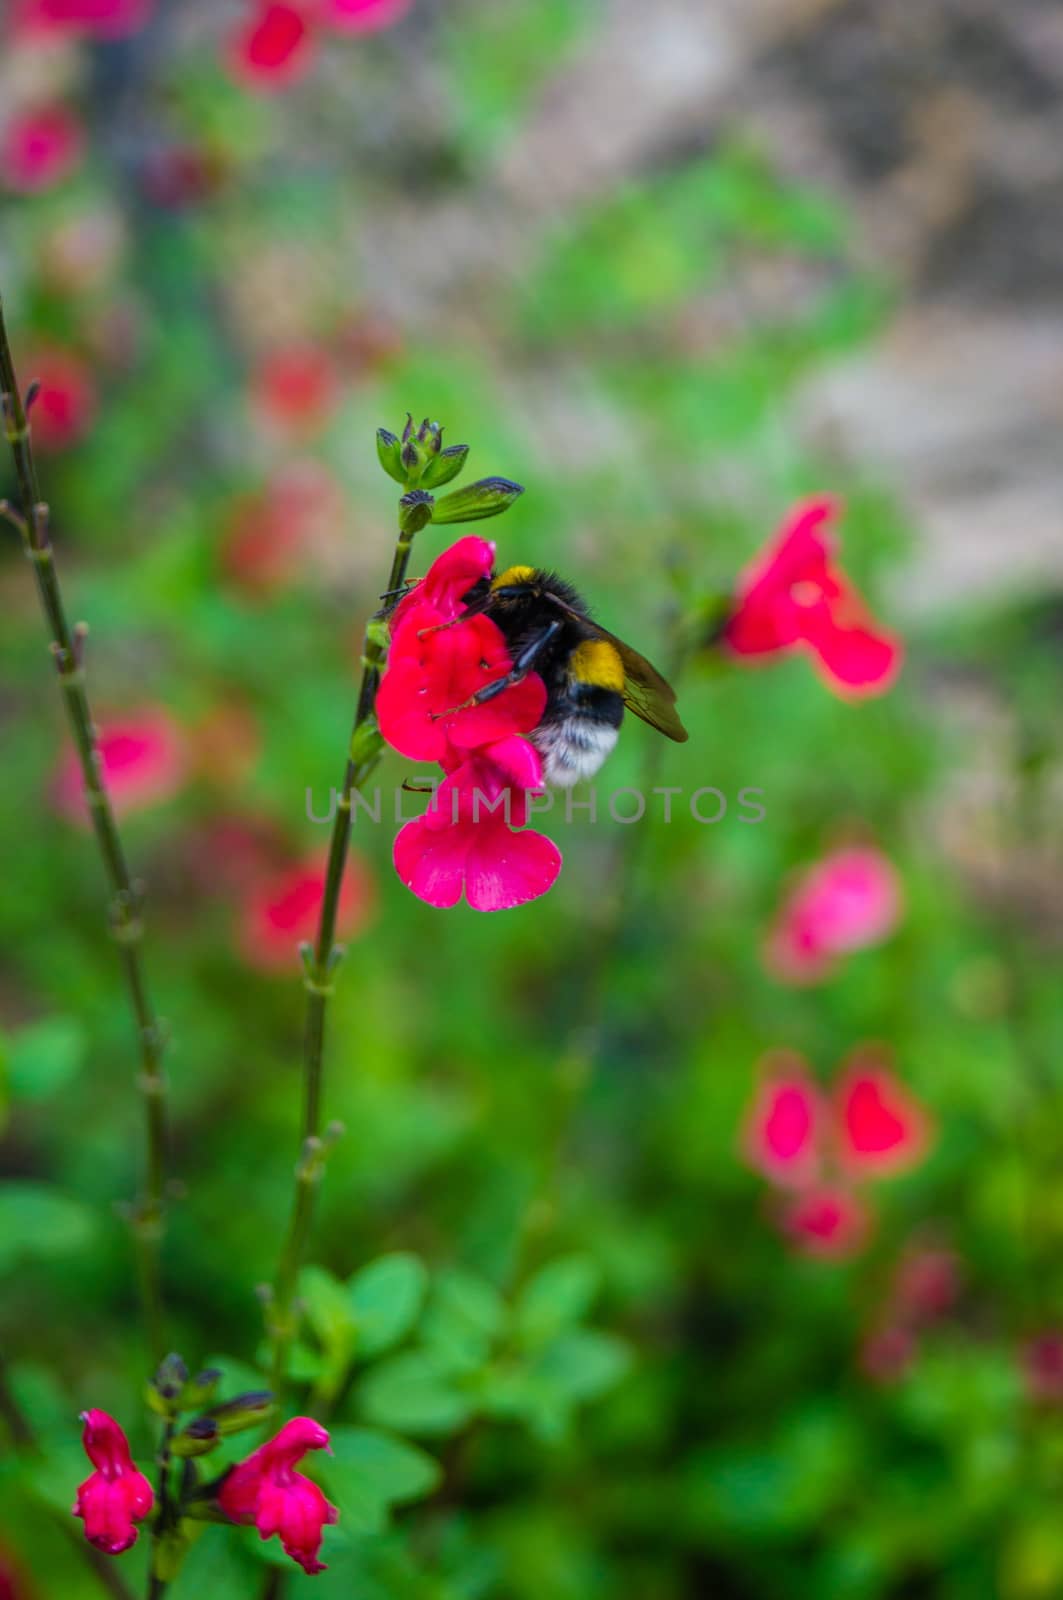 Close-up shot of a bumblebee on a red flower